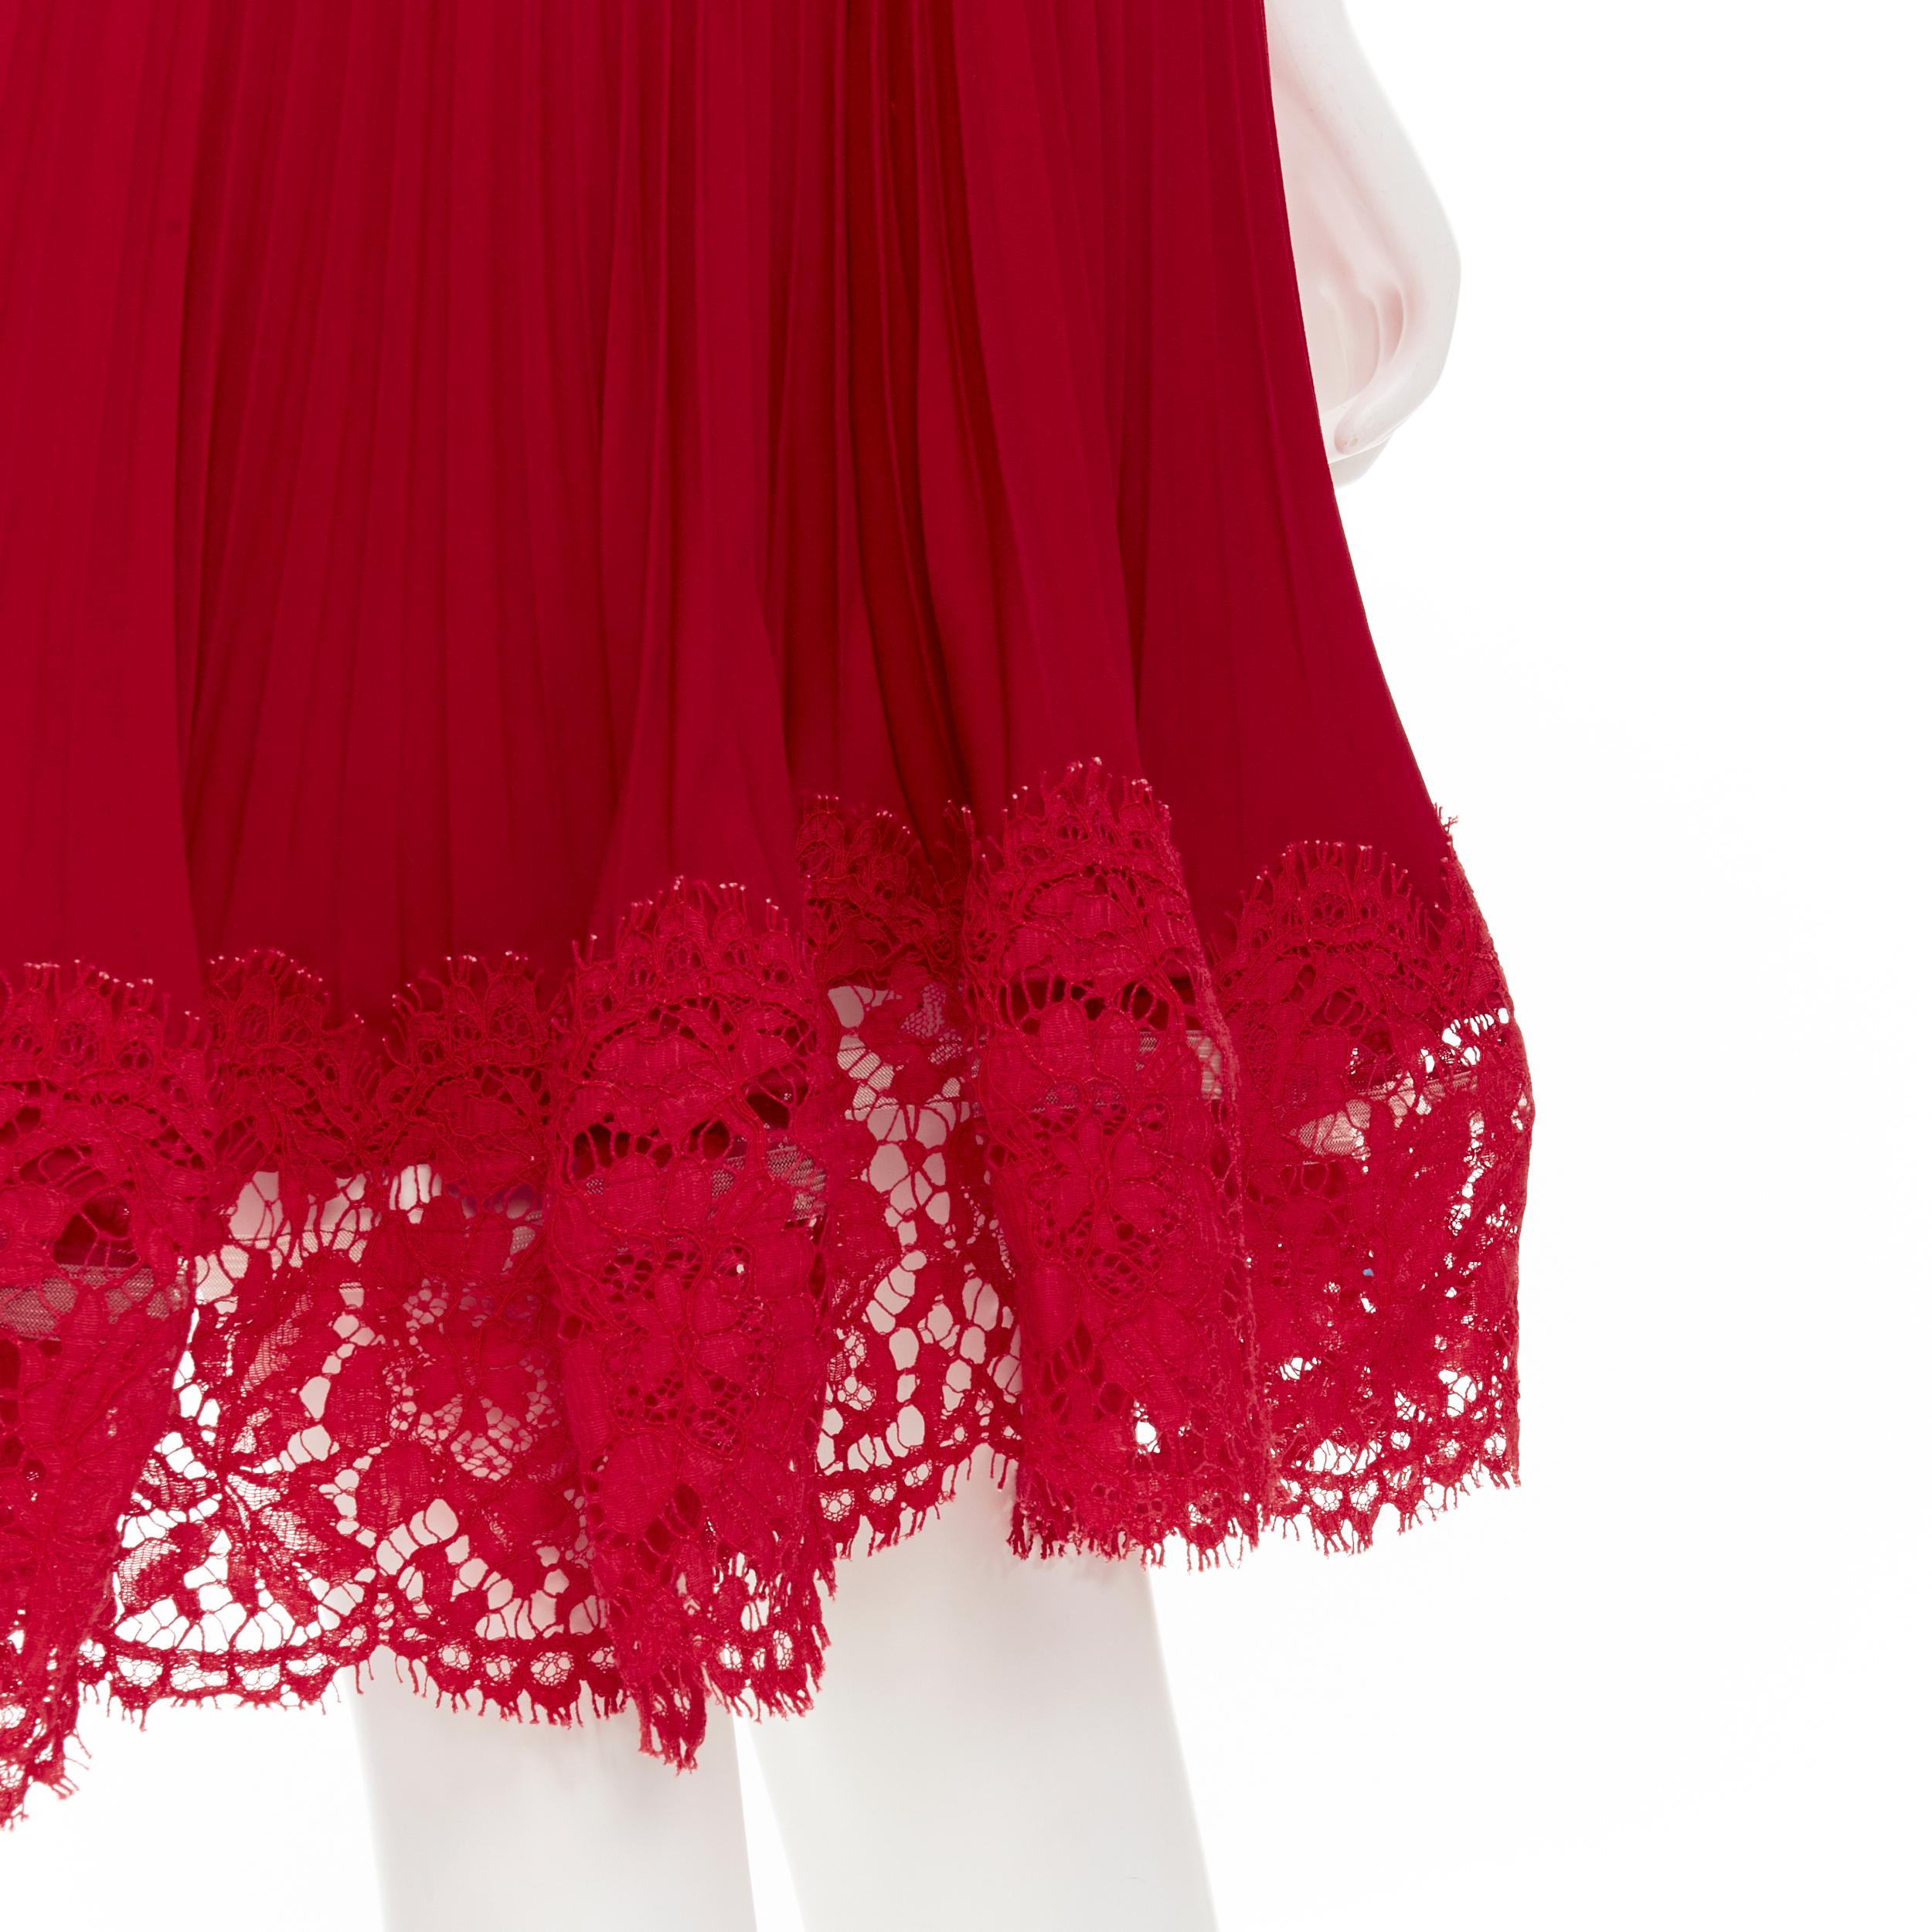 VALENTINO red floral lace knife pleat skirt cocktail dress IT38 XS 
Reference: TGAS/B02028 
Brand: Valentino 
Material: Silk 
Color: Red 
Pattern: Solid 
Closure: Zip 
Extra Detail: Lace bodice. Knife pleated skirt. lace trimming at hem. 
Made in: